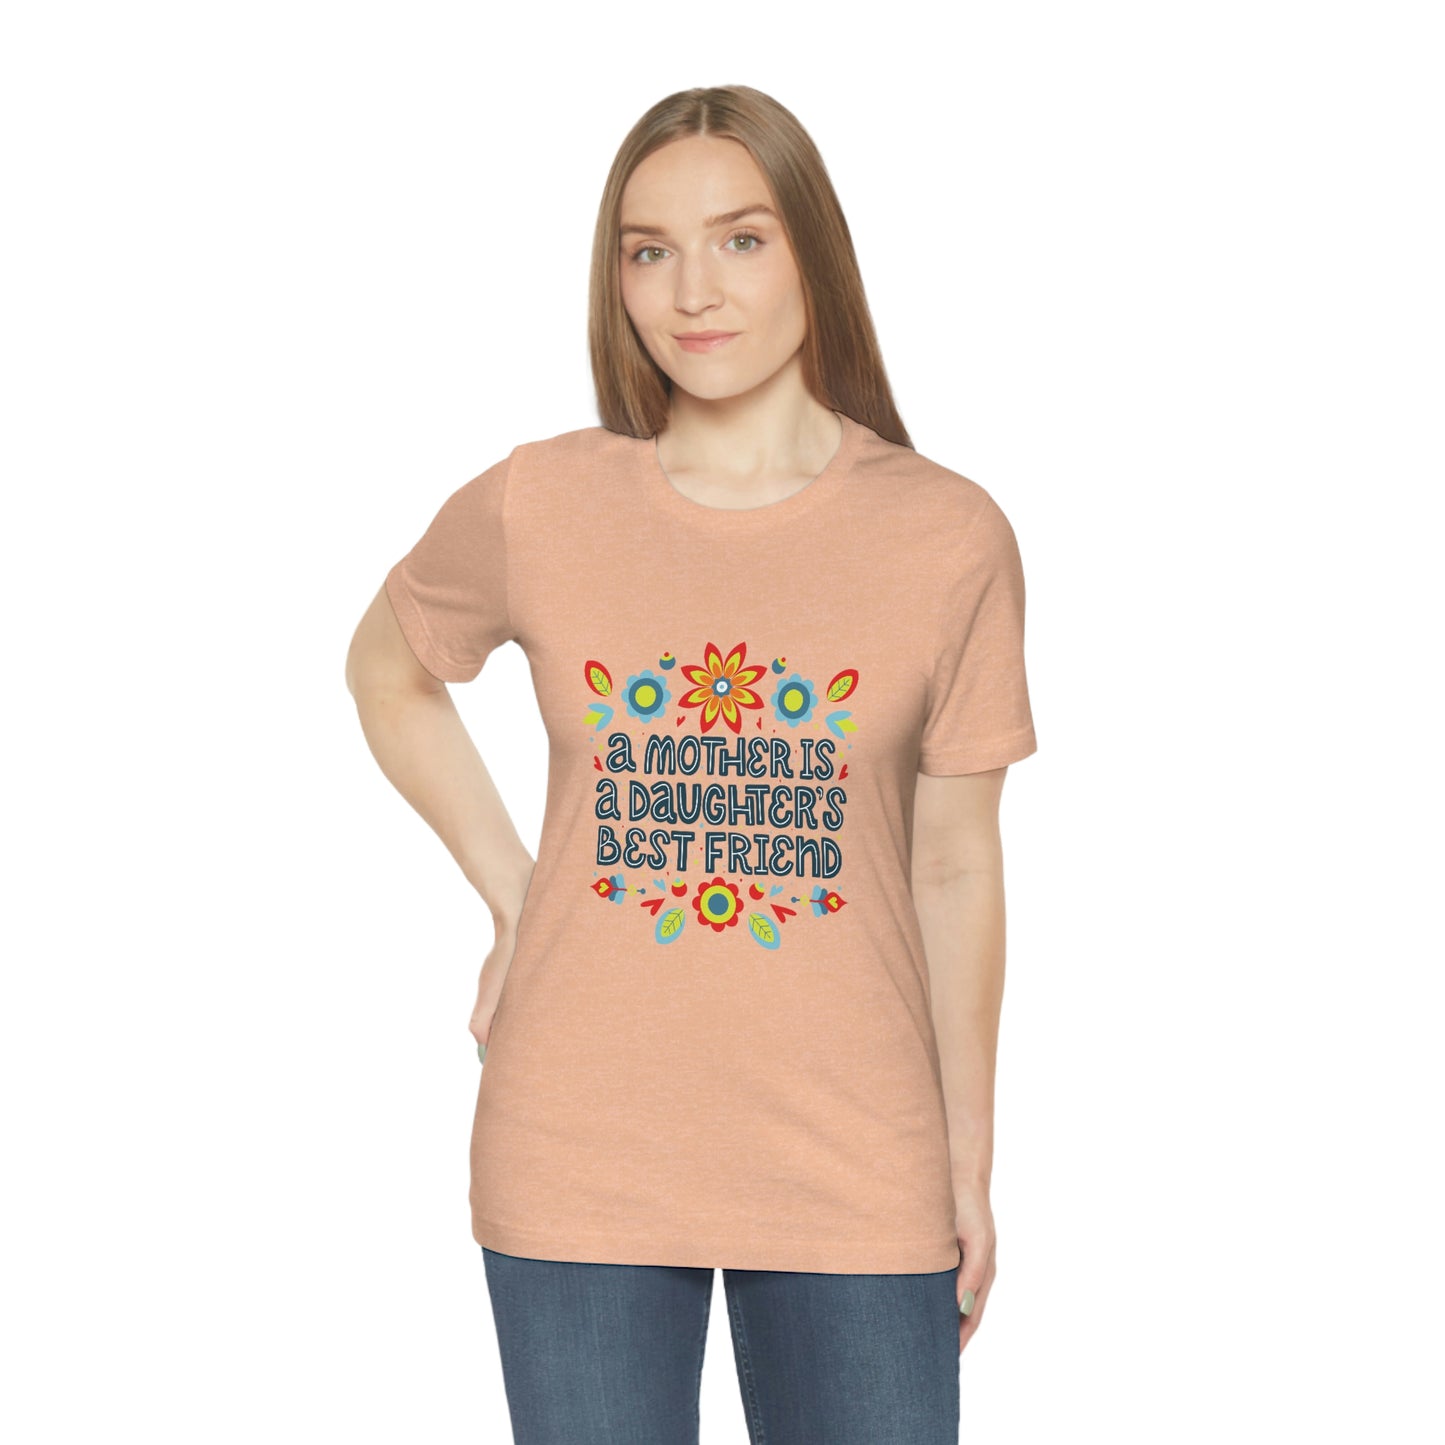 Show your gratitude for mom with this peach colored Best Friend Mom and Daughter T-Shirt. Perfect gift for mom.